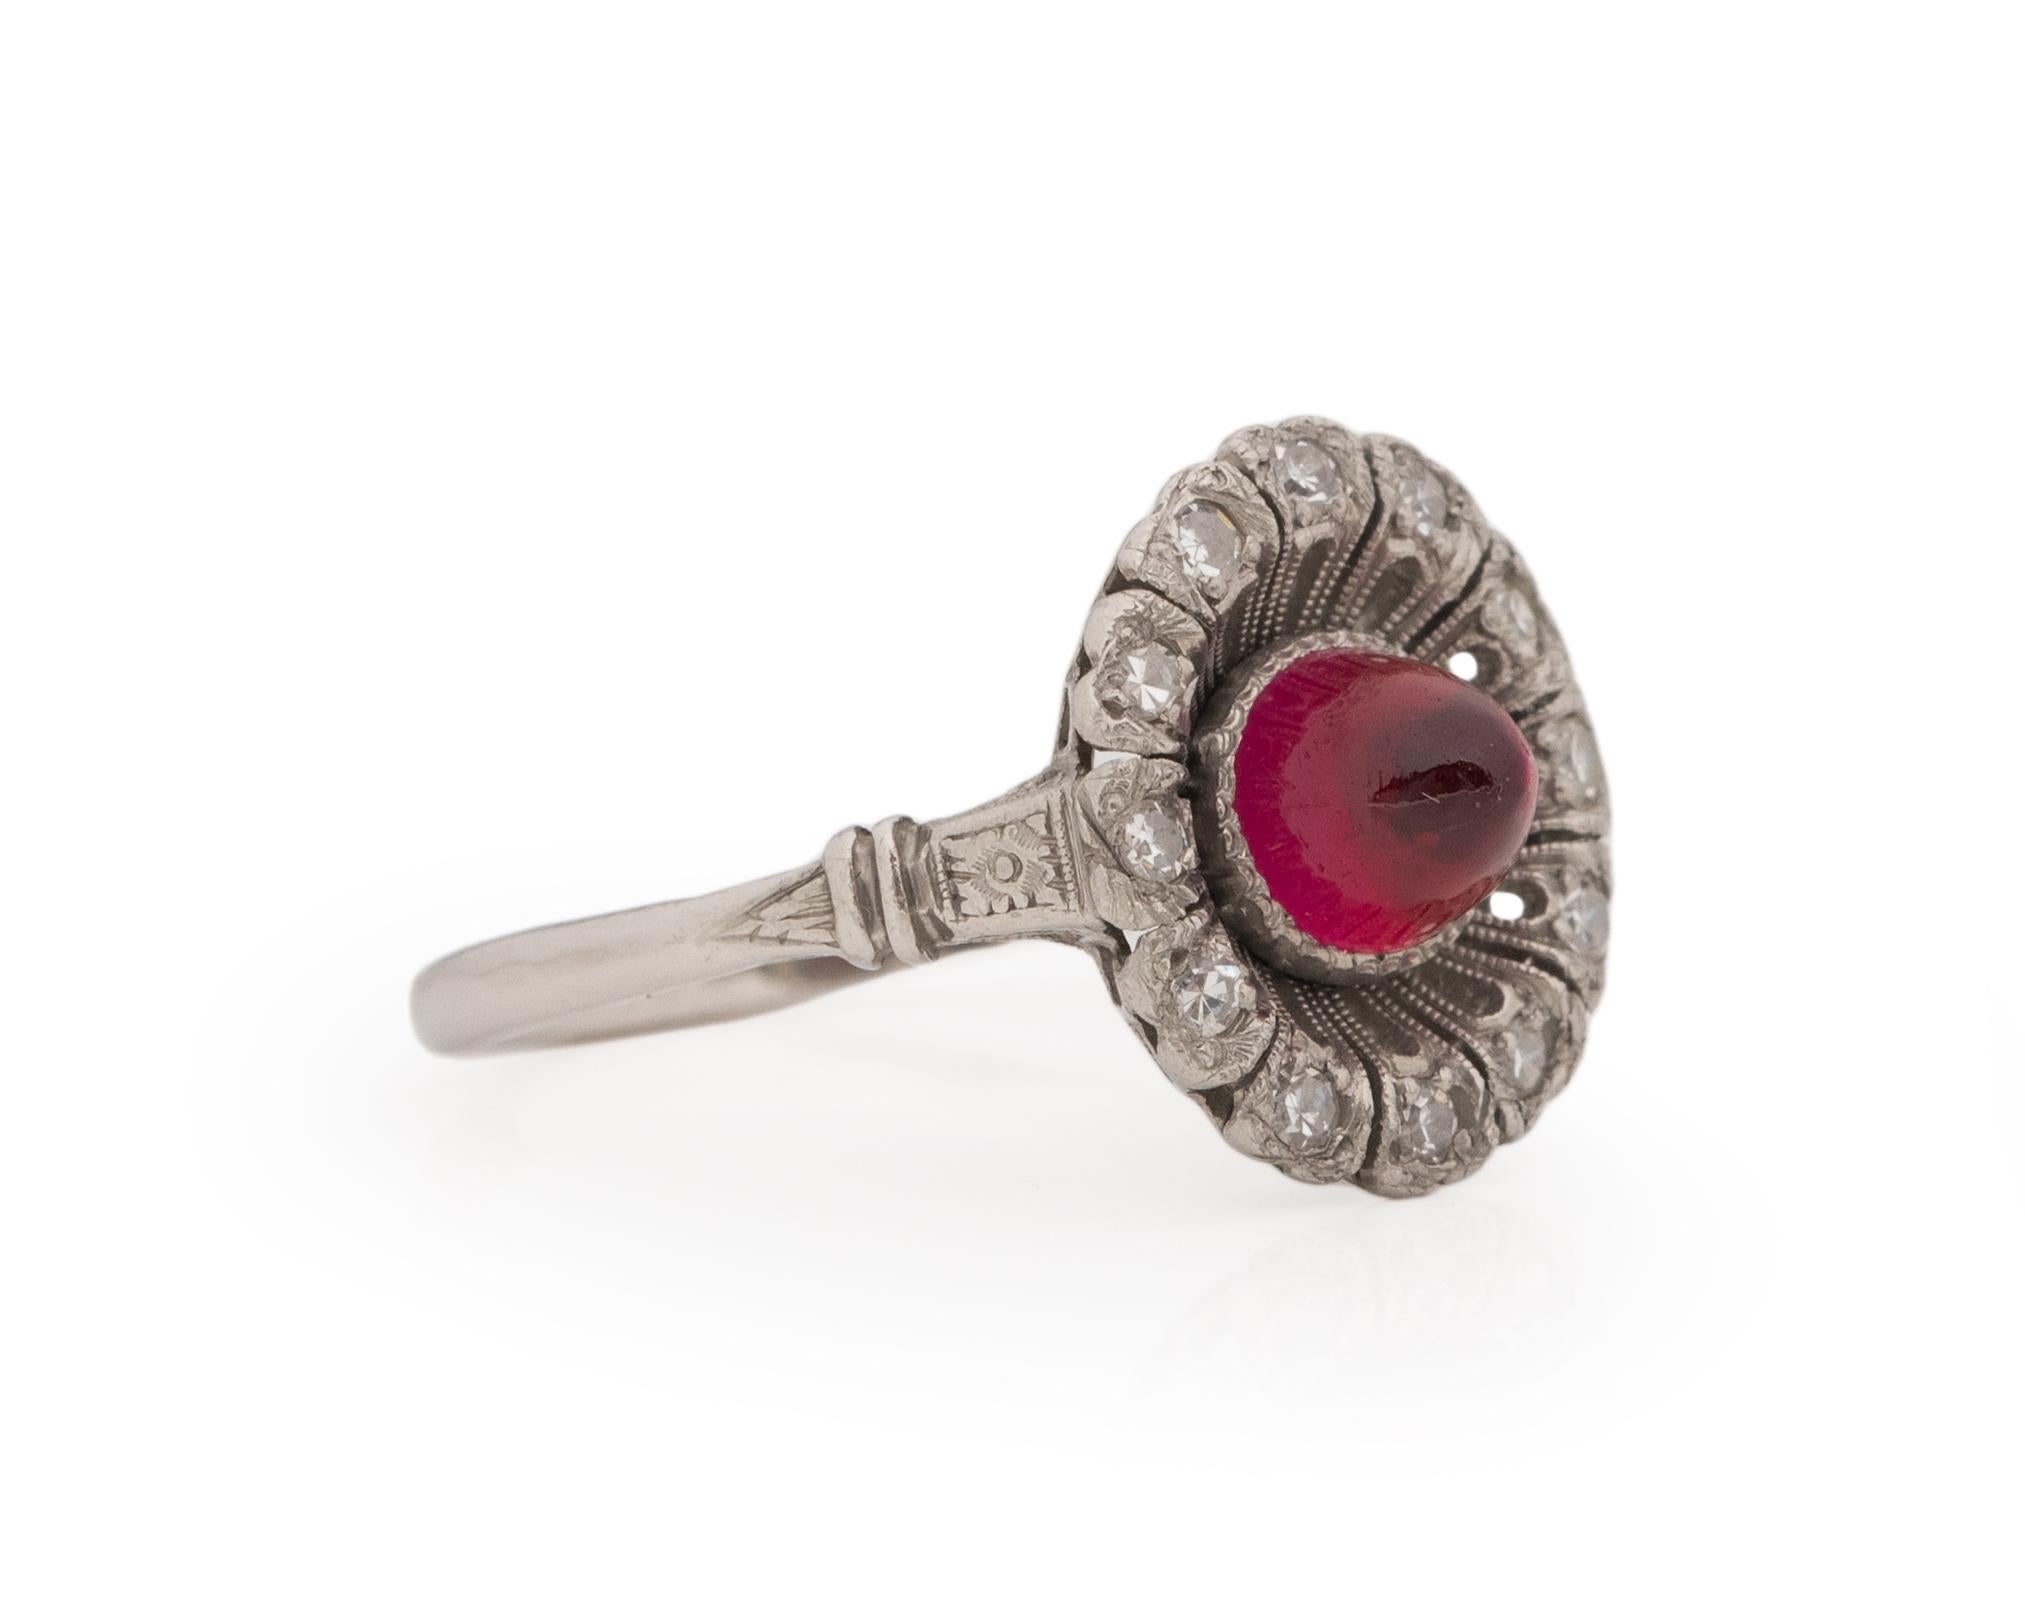 Ring Size: 7.5
Metal Type: Platinum [Hallmarked, and Tested]
Weight: 3.0 grams
Center Stone Details: 
Type: Ruby (Created)
Size: 1.00ct
Color: Red
Shape: Cabachon
Diamond Details:
Weight: .25ct, total weight
Cut: Old European brilliant
Color: